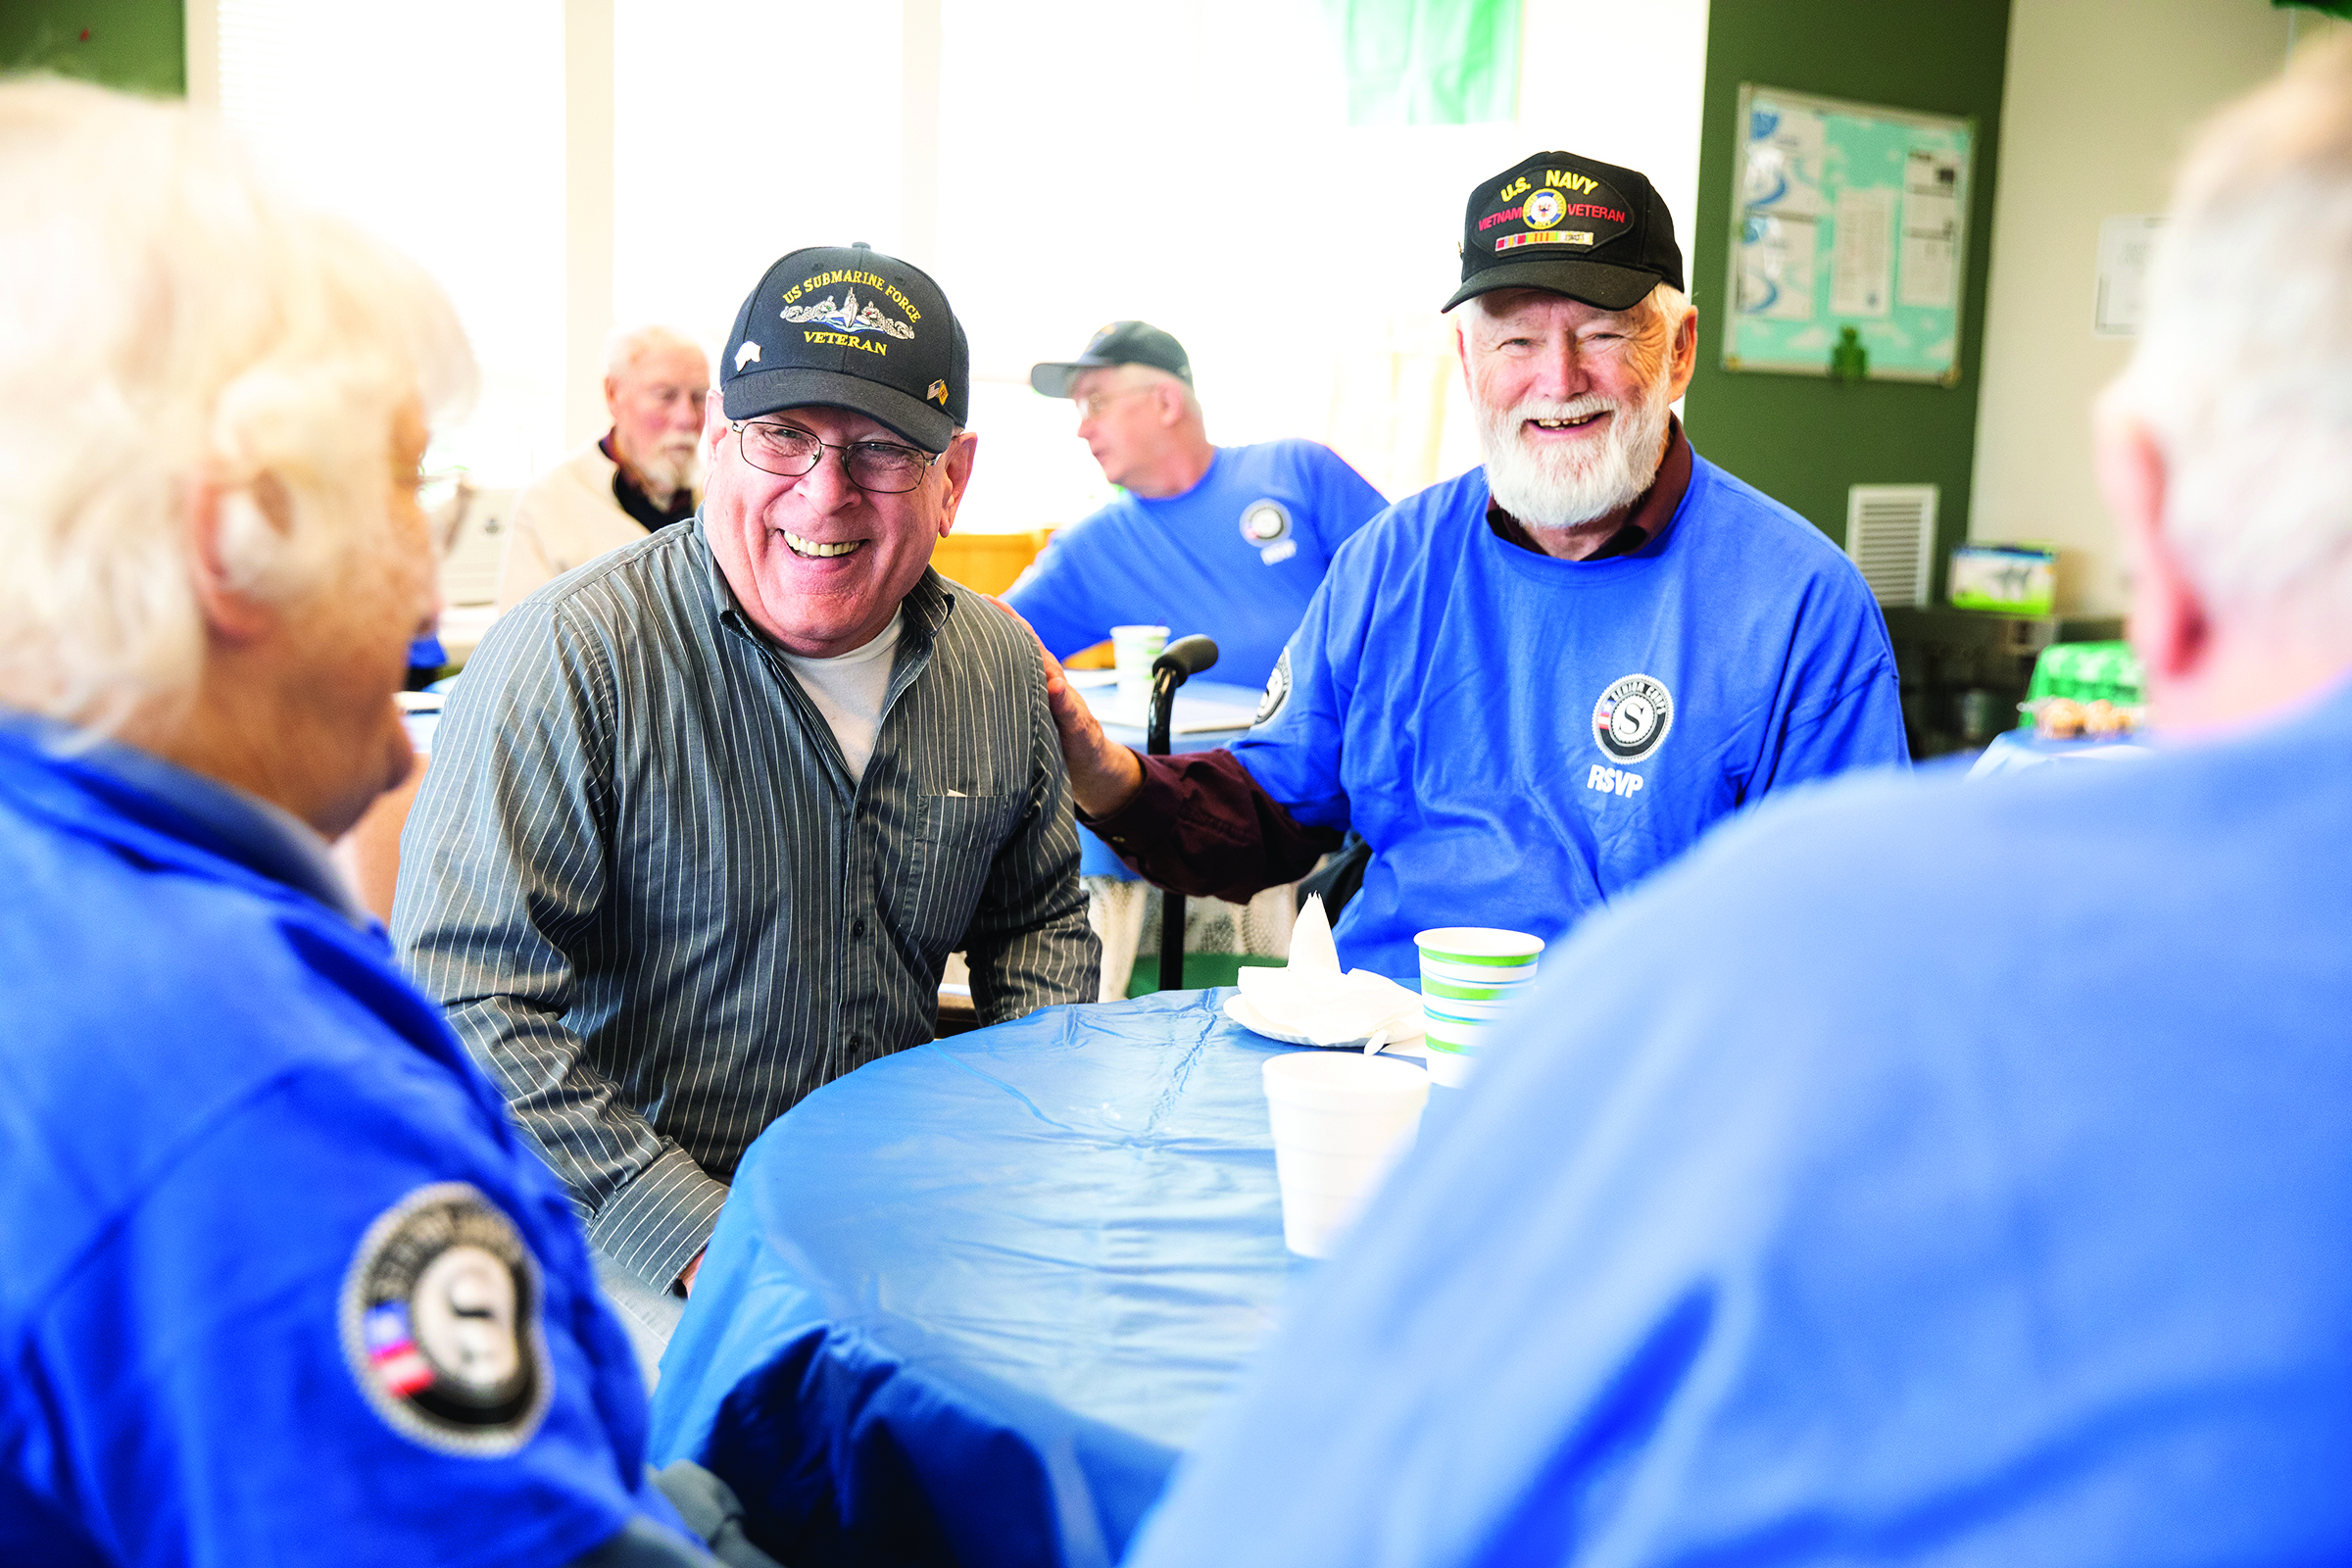 Source: CNCS, Senior Corps volunteers and military veterans engage in Mystic, Connecticut.